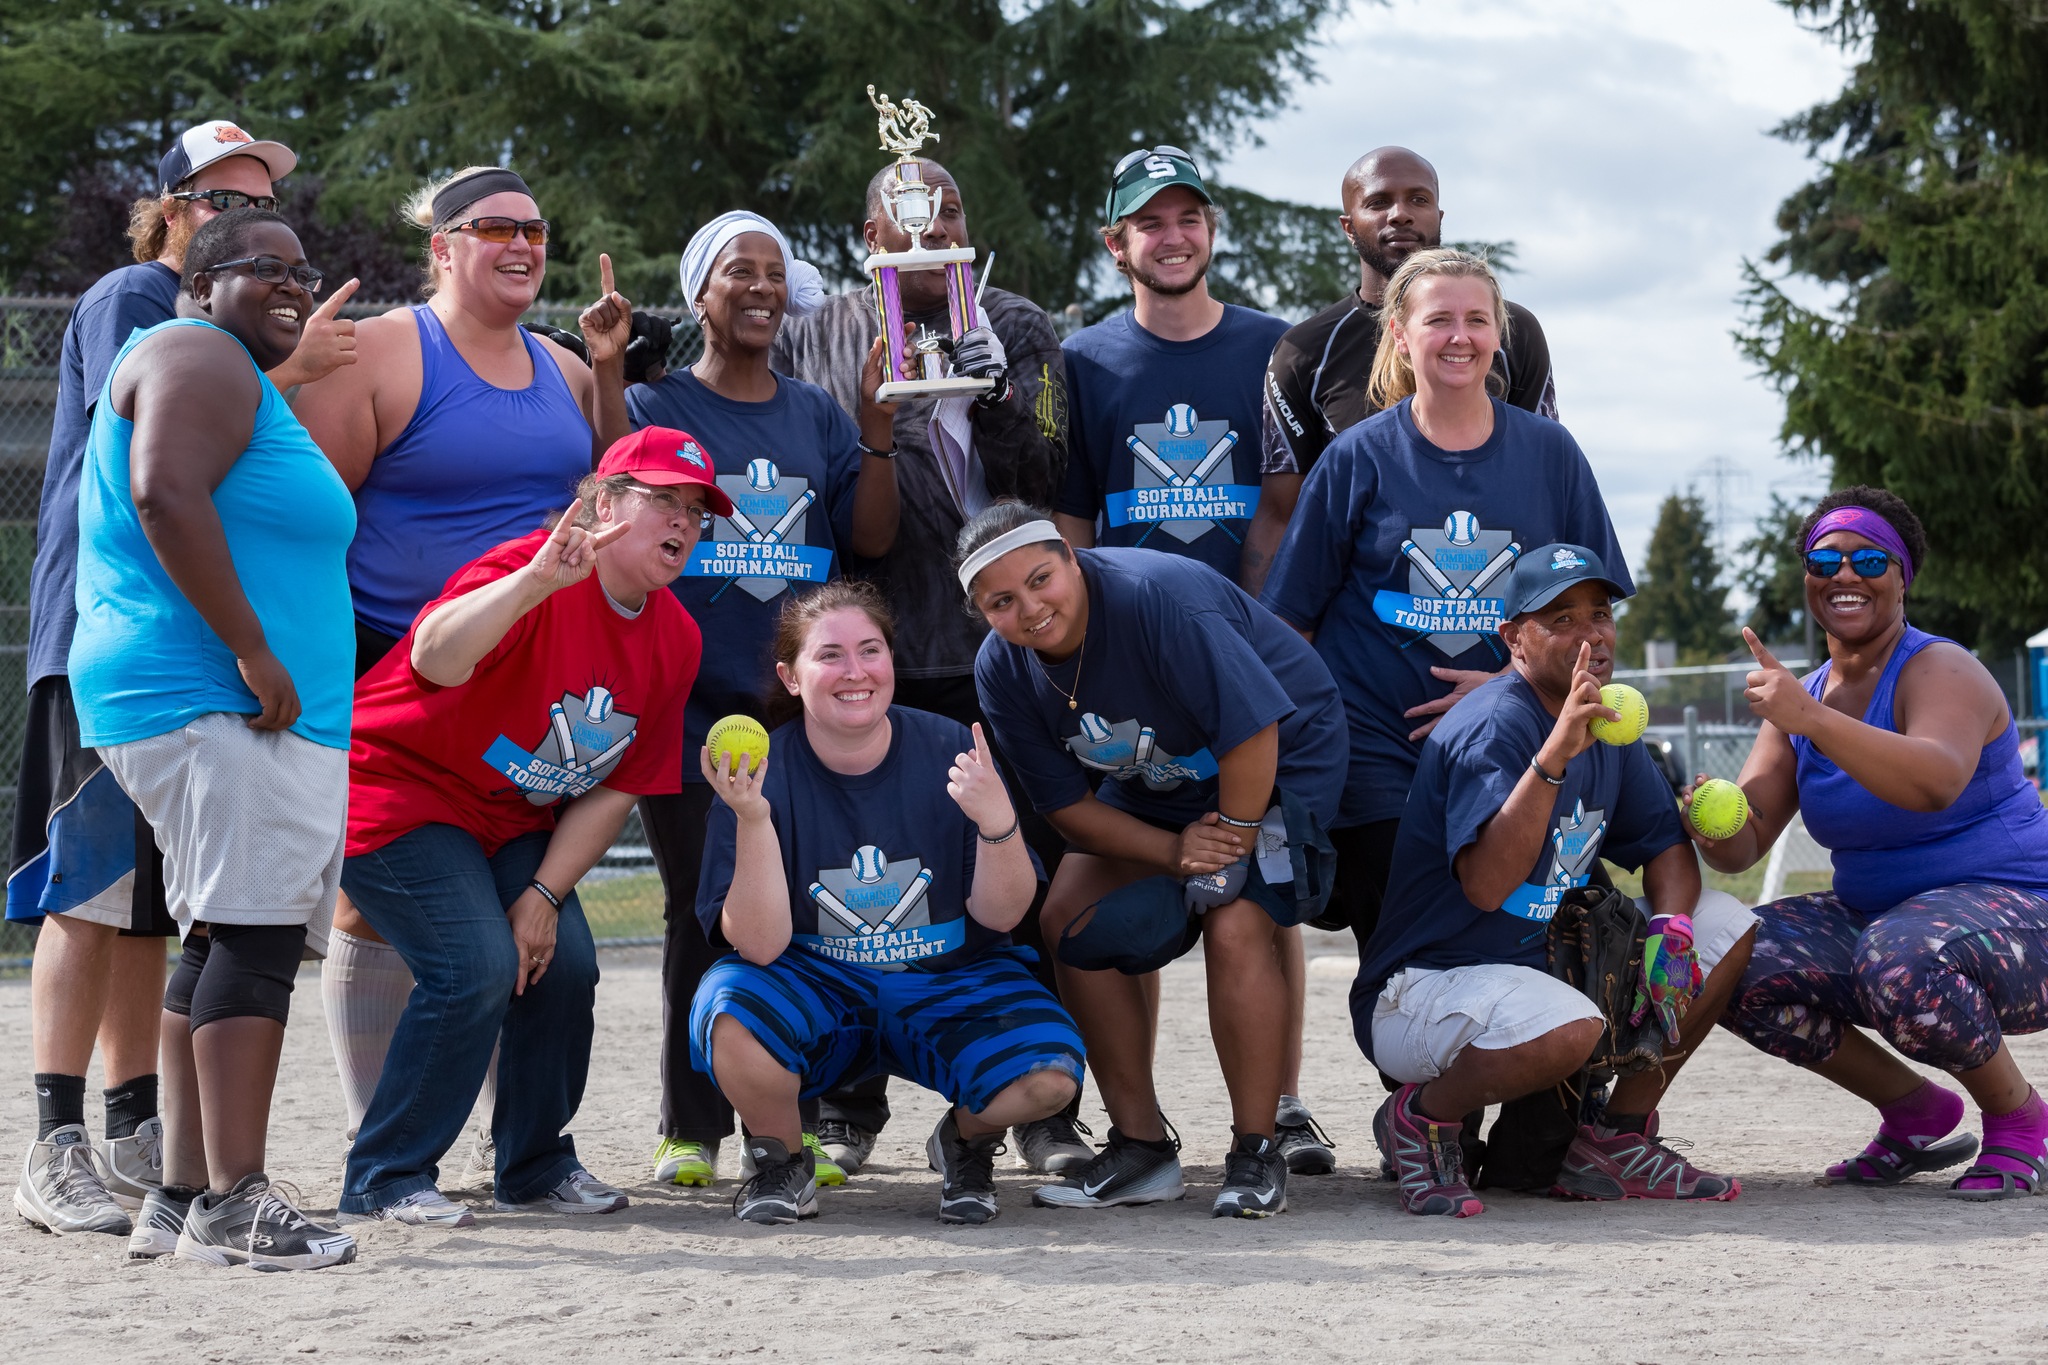 The Department of Social and Health Services All-Stars captured the State Combined Fund Drive Softball Tournament at Brannan Park on Aug. 27. COURTESY PHOTO